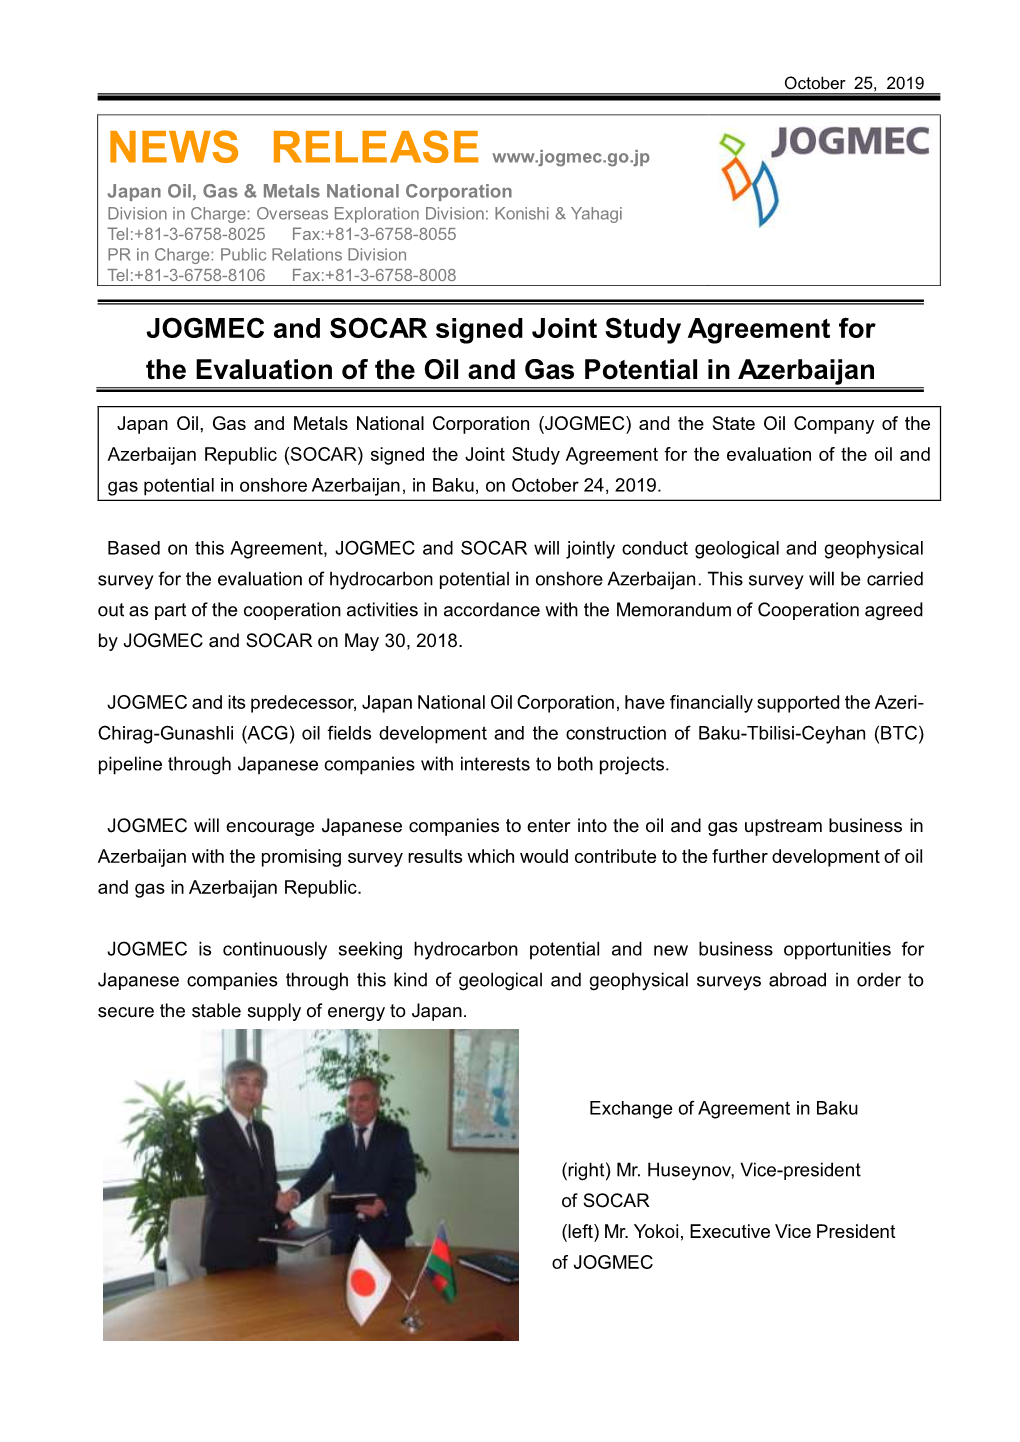 JOGMEC and SOCAR Signed Joint Study Agreement for the Evaluation of the Oil and Gas Potential in Azerbaijan